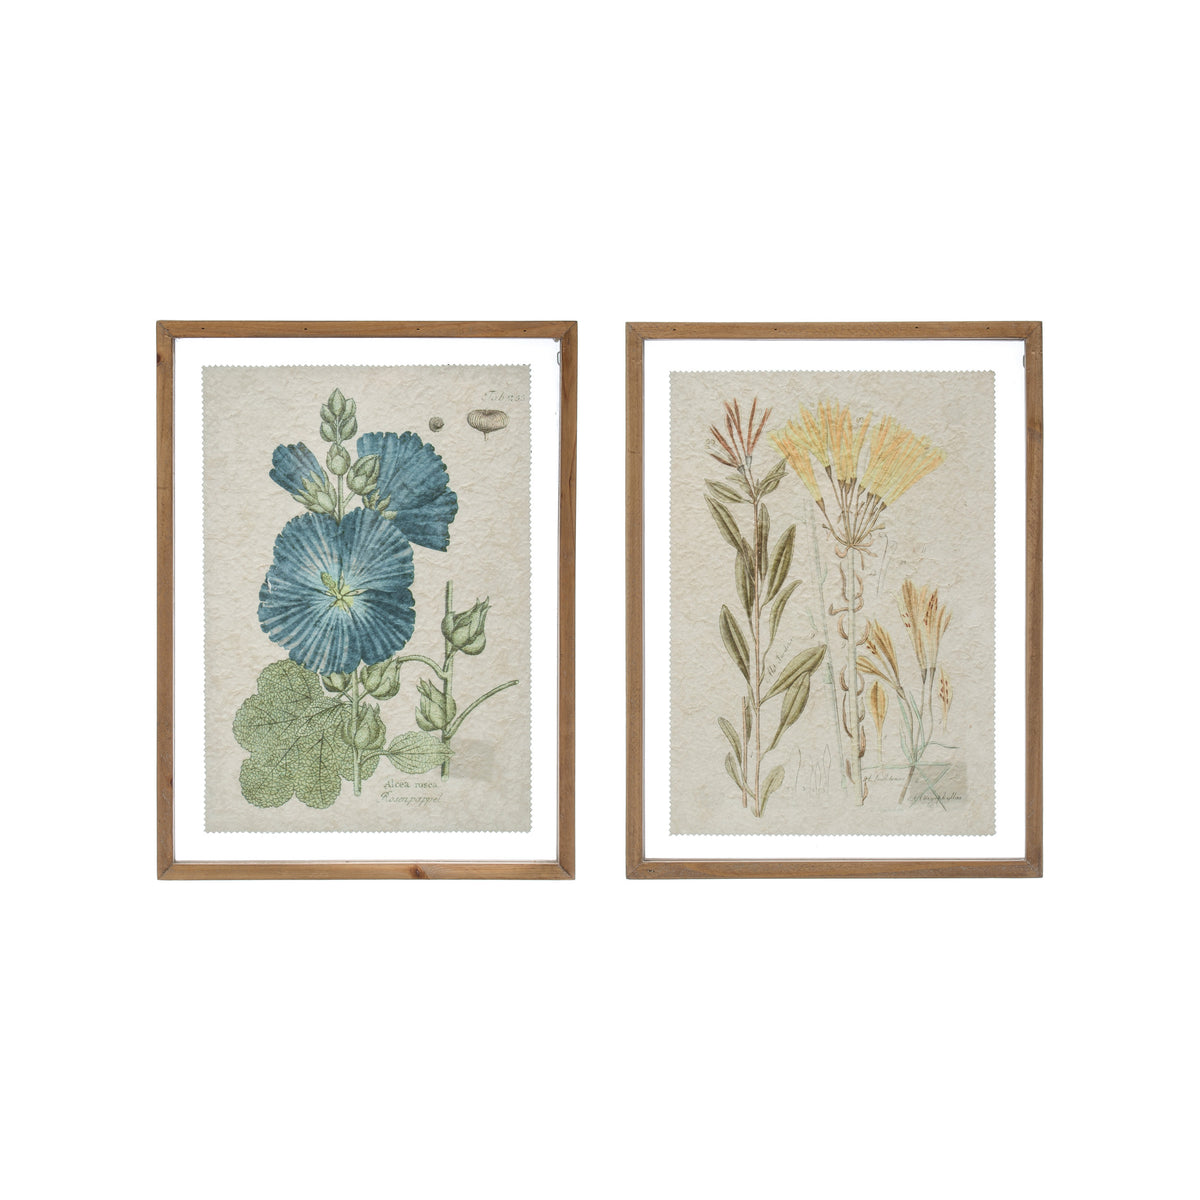 Framed Wall Decor w/Floral Image